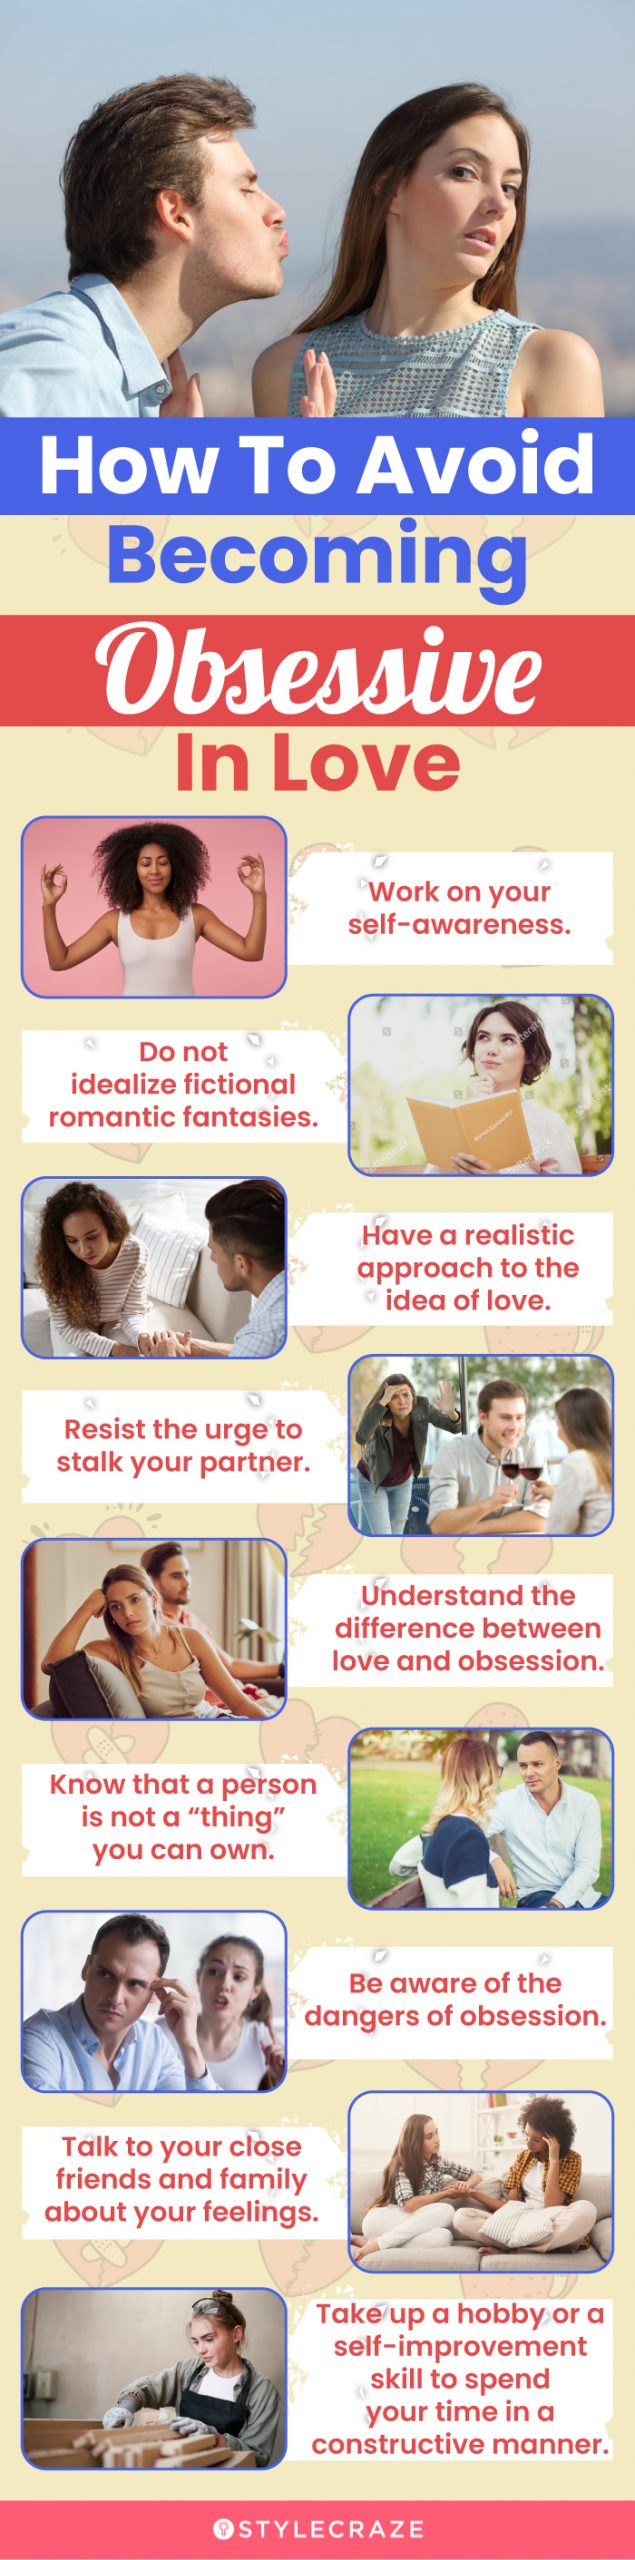 how to avoid becoming obsessive in love (infographic)